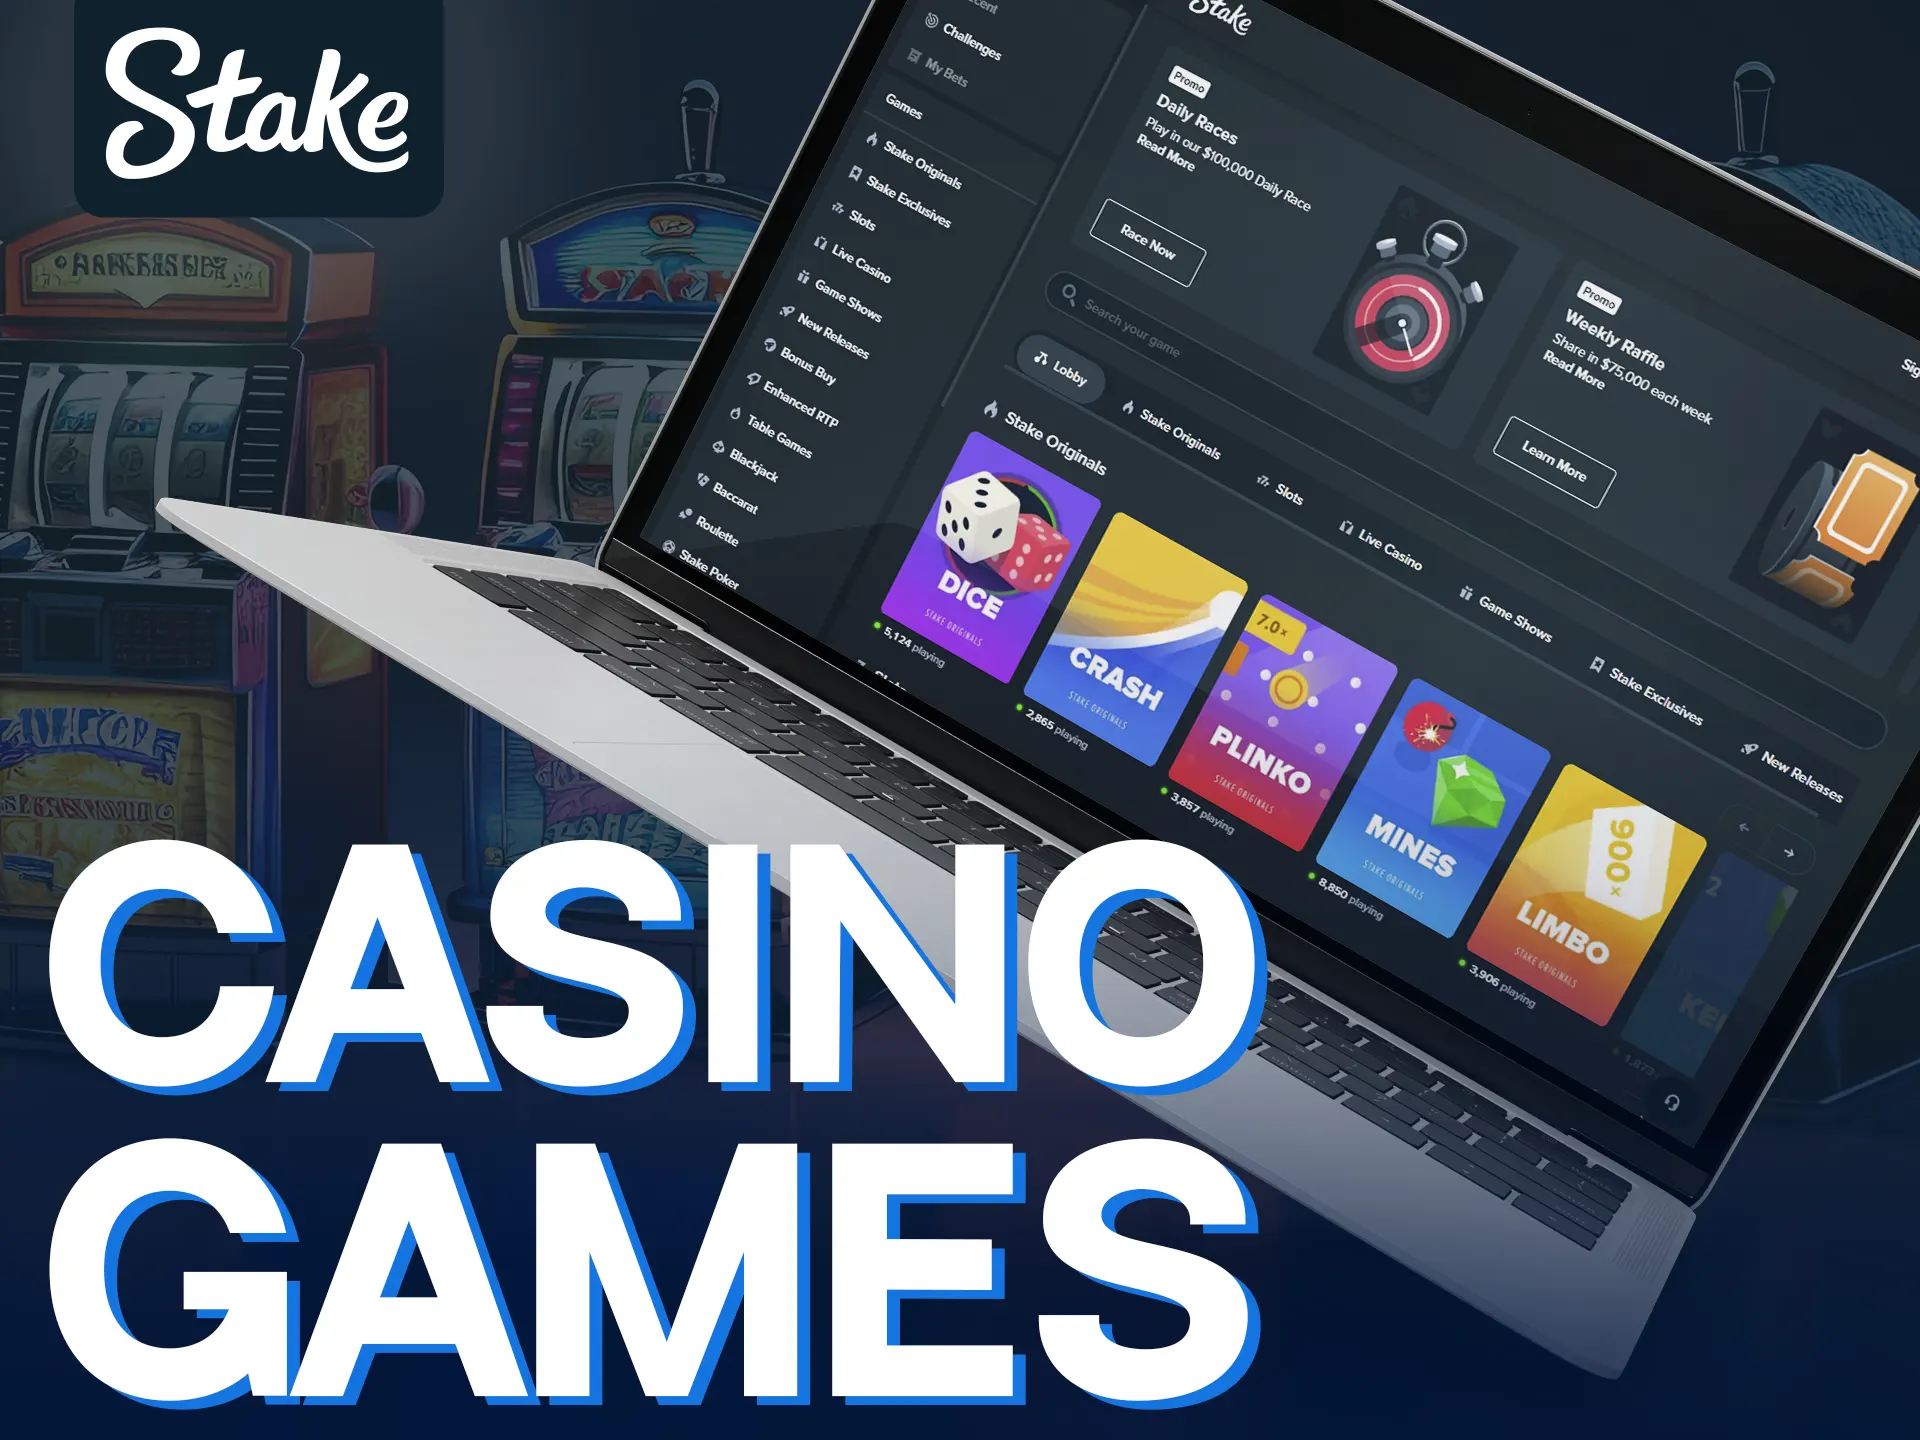 Stake offers a wide variety of casino games.